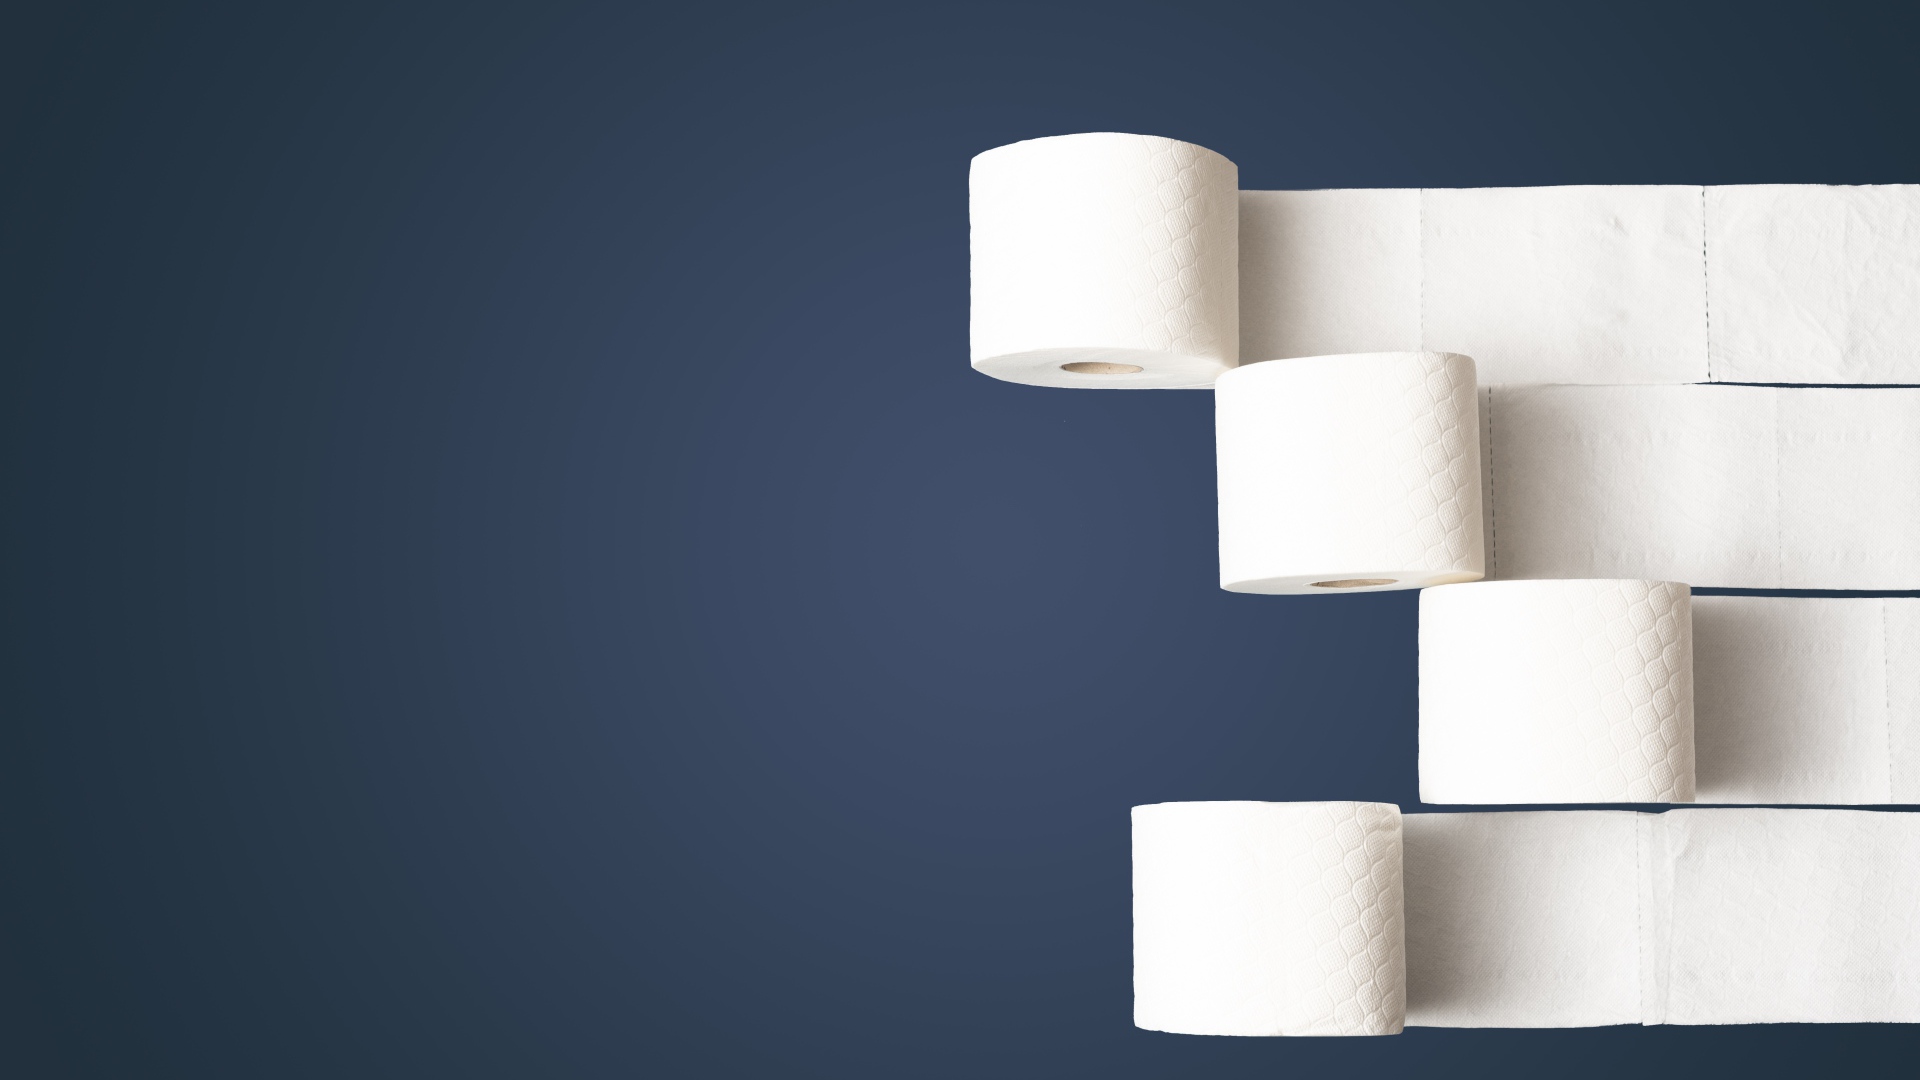 Four rolls of white toilet paper on gray background